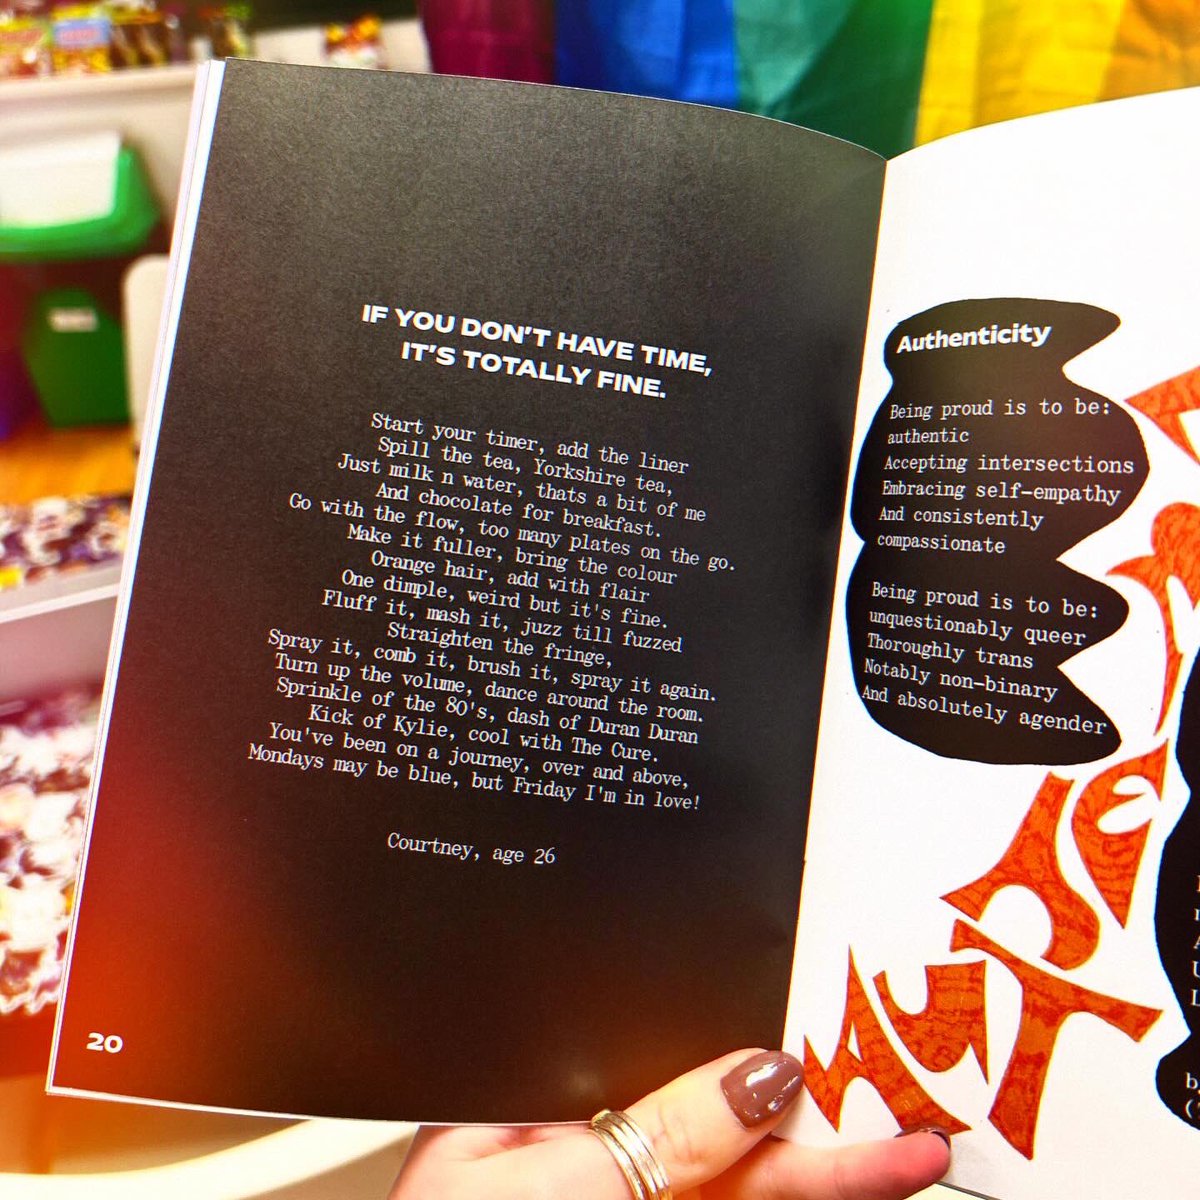 Delighted to share our Recipe for Me poems for the ‘Reyt Proud Zine’ @RightUpRStreet 🙌🏳️‍🌈 Check out ‘Stage Fright’ by Youth Cllr Alex, ‘My Trans Musical Medley’ by Youth Cllr Alumni Jordan & ‘If you don’t have time it’s totally fine’ by our Participation Officer Courtney 💁🏻‍♀️💫